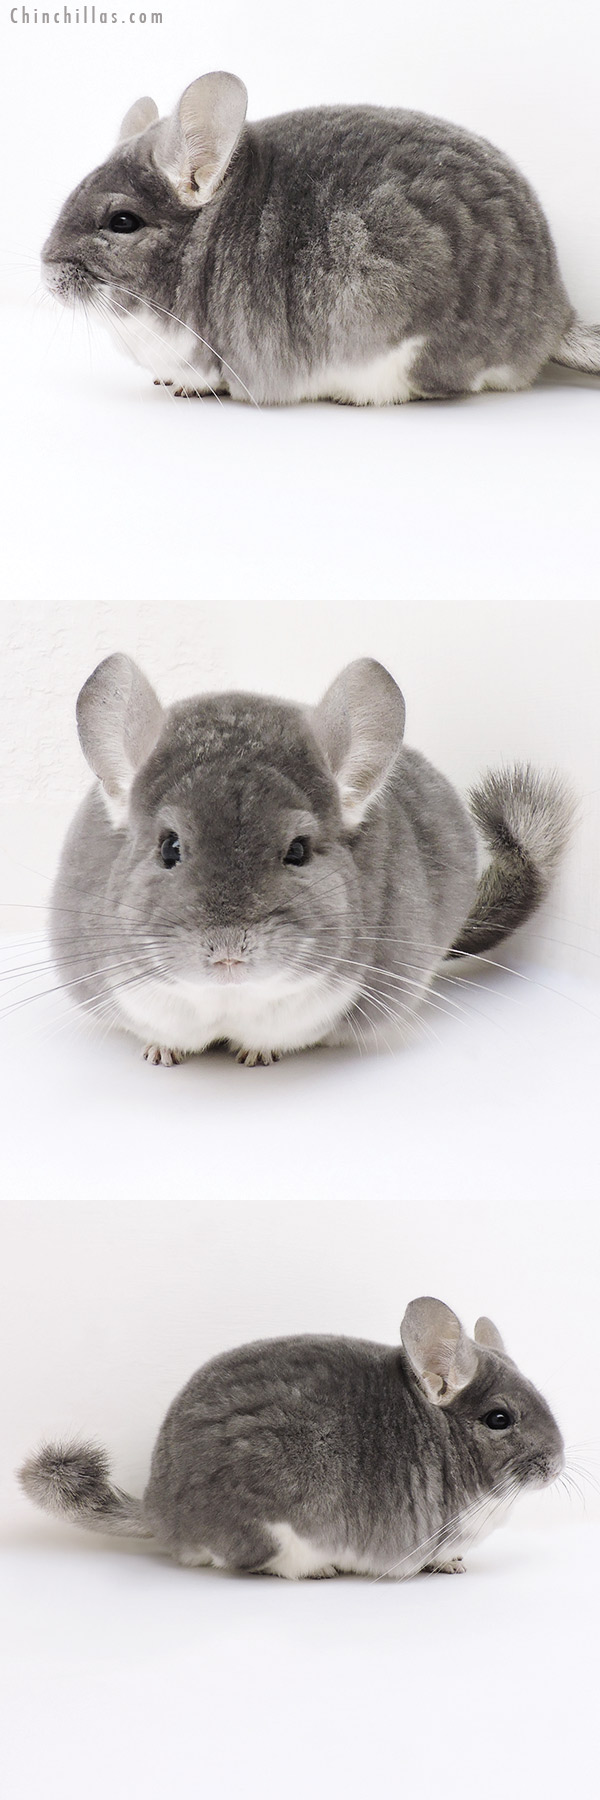 Chinchilla or related item offered for sale or export on Chinchillas.com - 17020 Large Blocky Premium Production Quality Violet Female Chinchilla